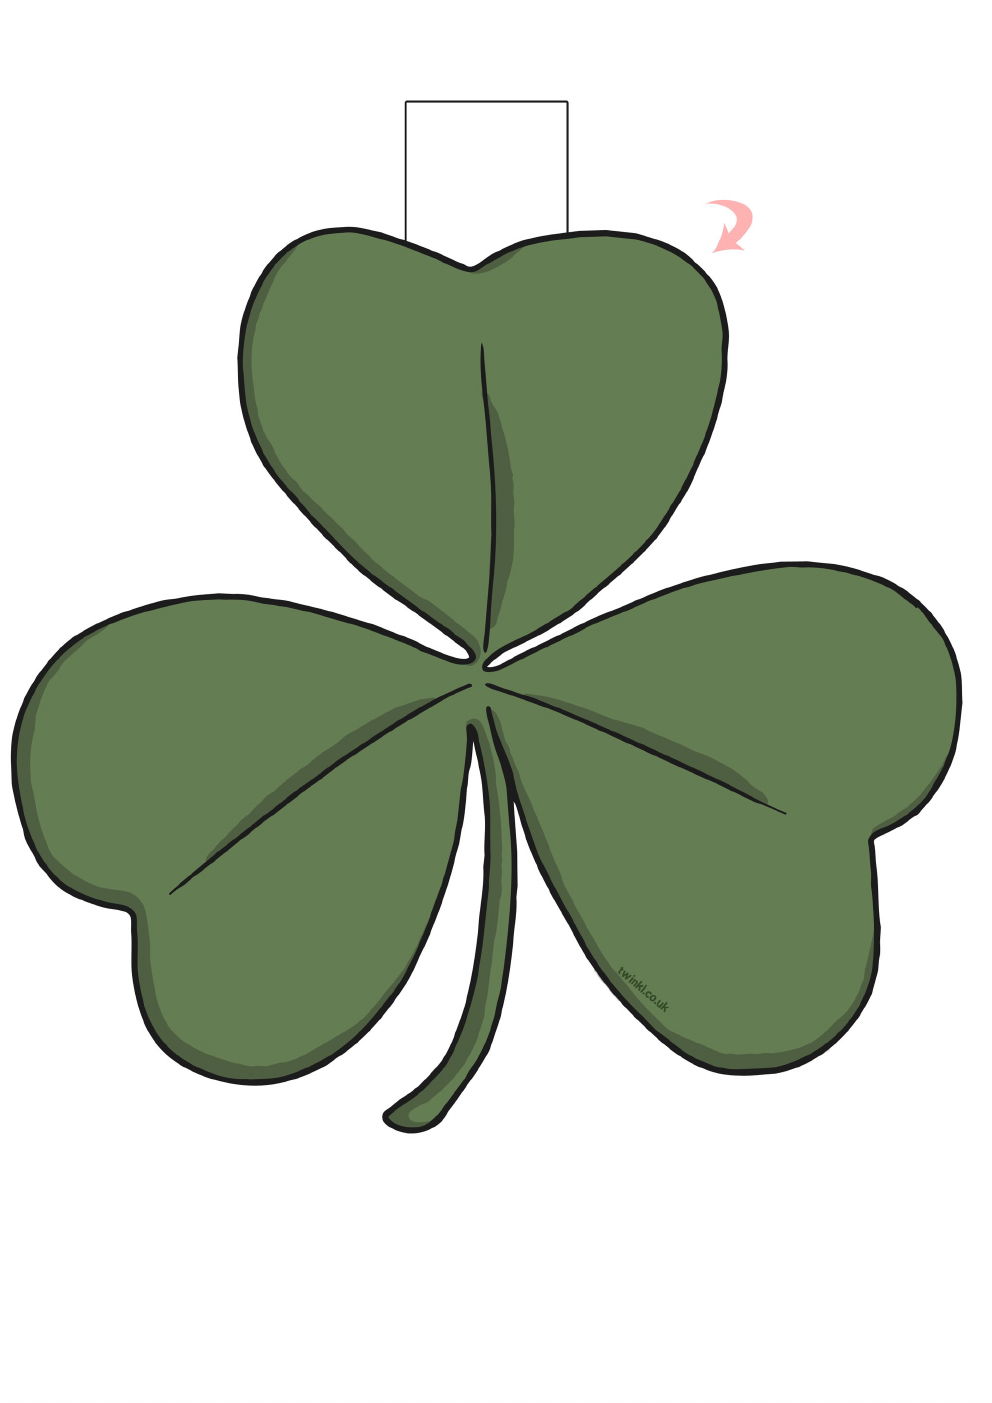 St Patricks Day Crafts for Kids Toddlers Free Printable